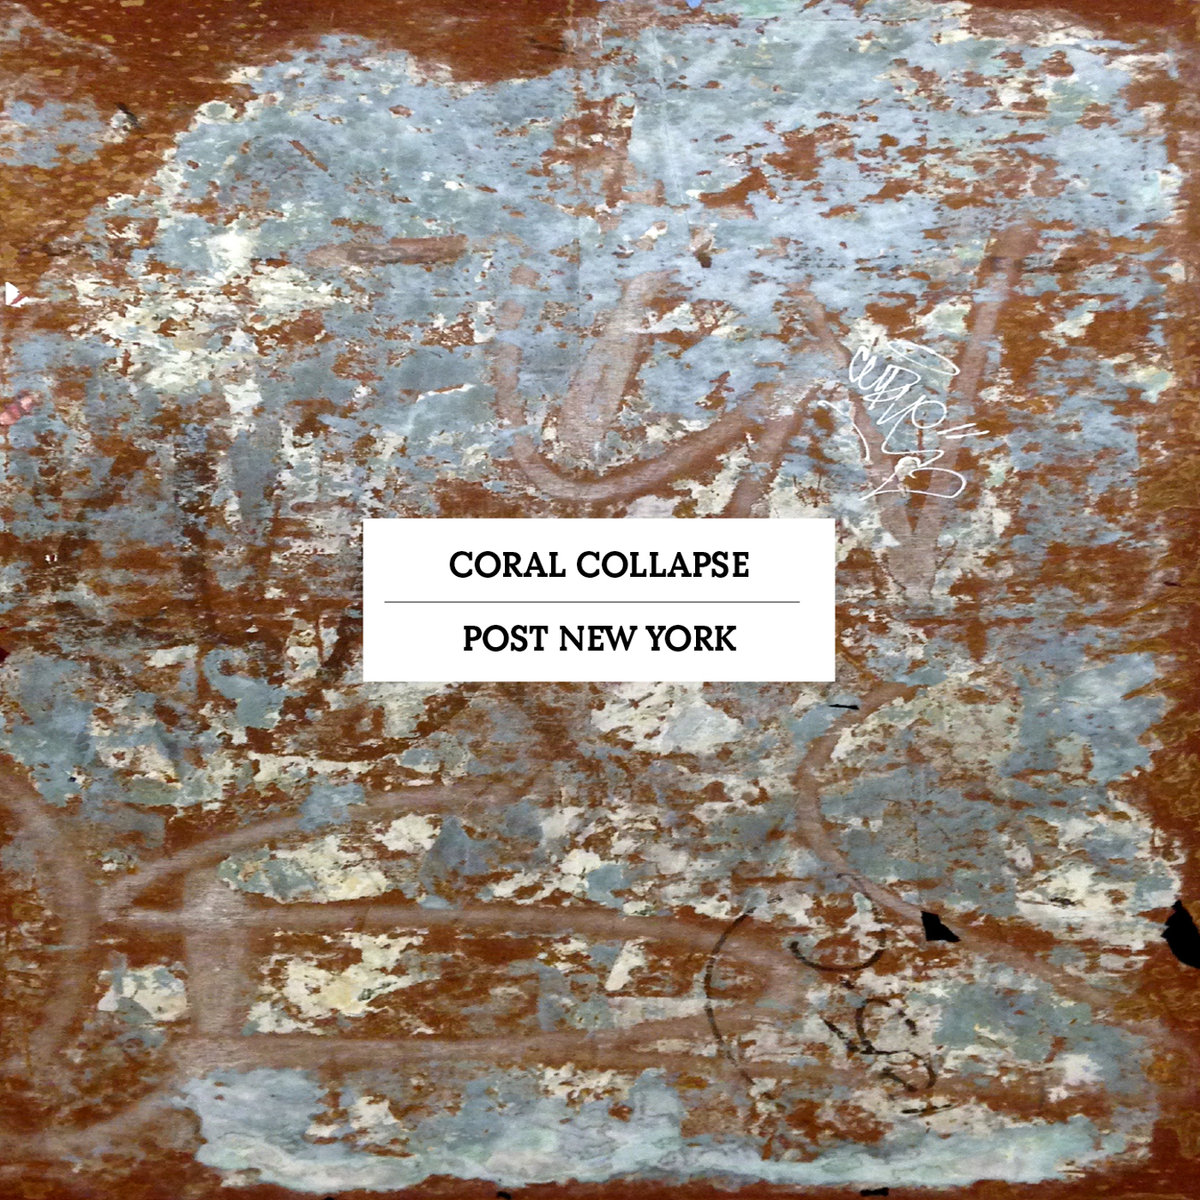 Coral Collapse – Post New York